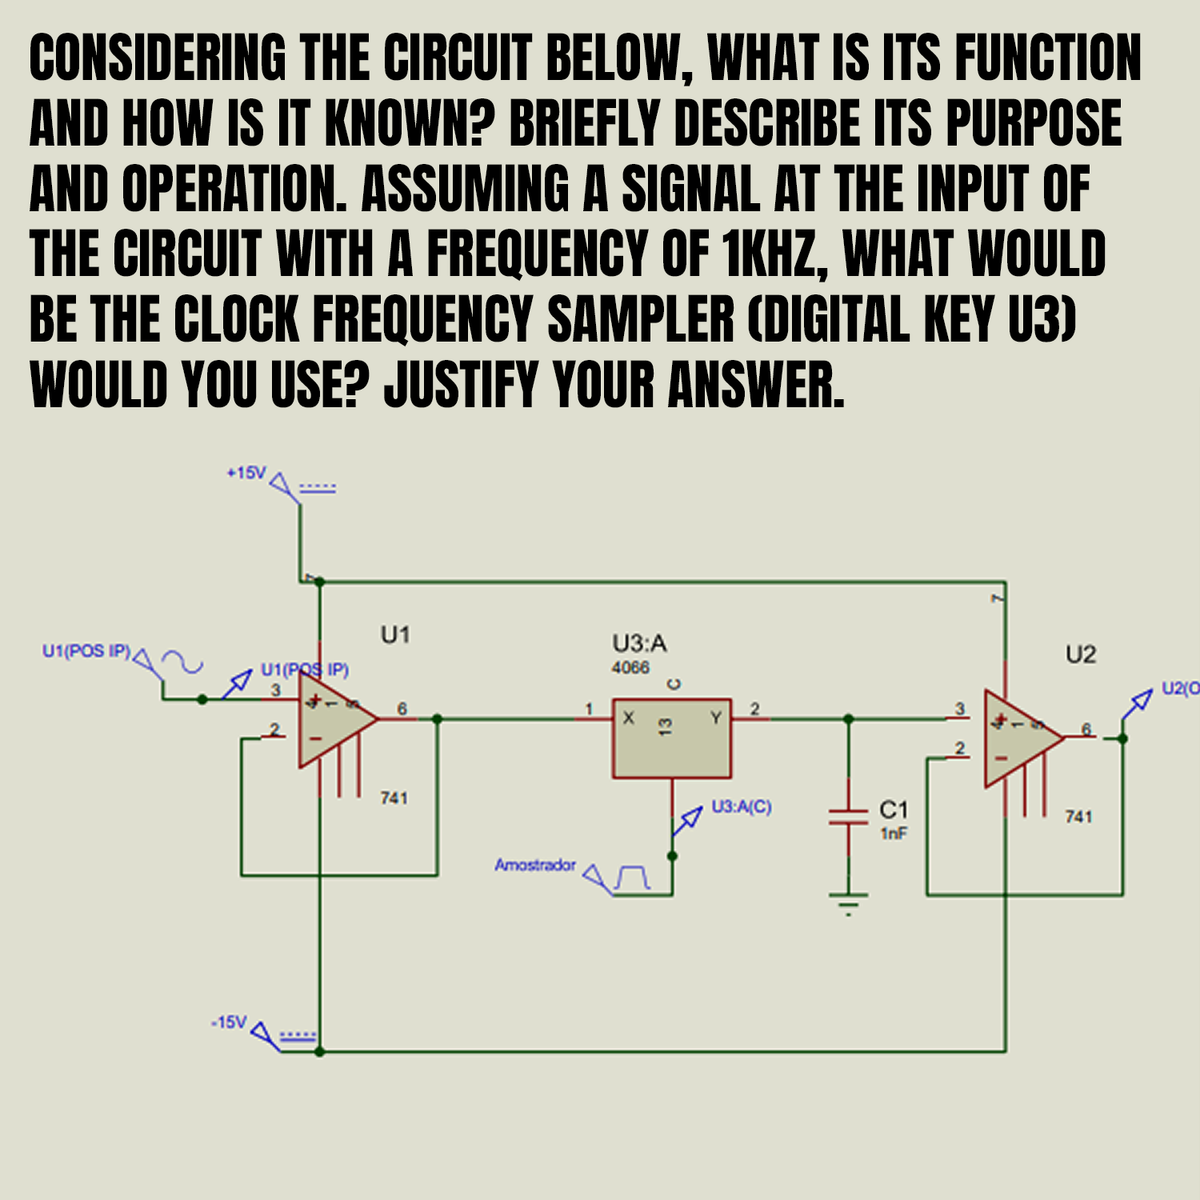 CONSIDERING THE CIRCUIT BELOW, WHAT IS ITS FUNCTION
AND HOW IS IT KNOWN? BRIEFLY DESCRIBE ITS PURPOSE
AND OPERATION. ASSUMING A SIGNAL AT THE INPUT OF
THE CIRCUIT WITH A FREQUENCY OF 1KHZ, WHAT WOULD
BE THE CLOCK FREQUENCY SAMPLER (DIGITAL KEY U3)
WOULD YOU USE? JUSTIFY YOUR ANSWER.
U1(POS IP)
+15V
-15V
U1(POS IP)
3
U1
6
741
Amostrador
1
U3:A
4066
X
U3:A(C)
C1
1nF
U2
741
U2(0